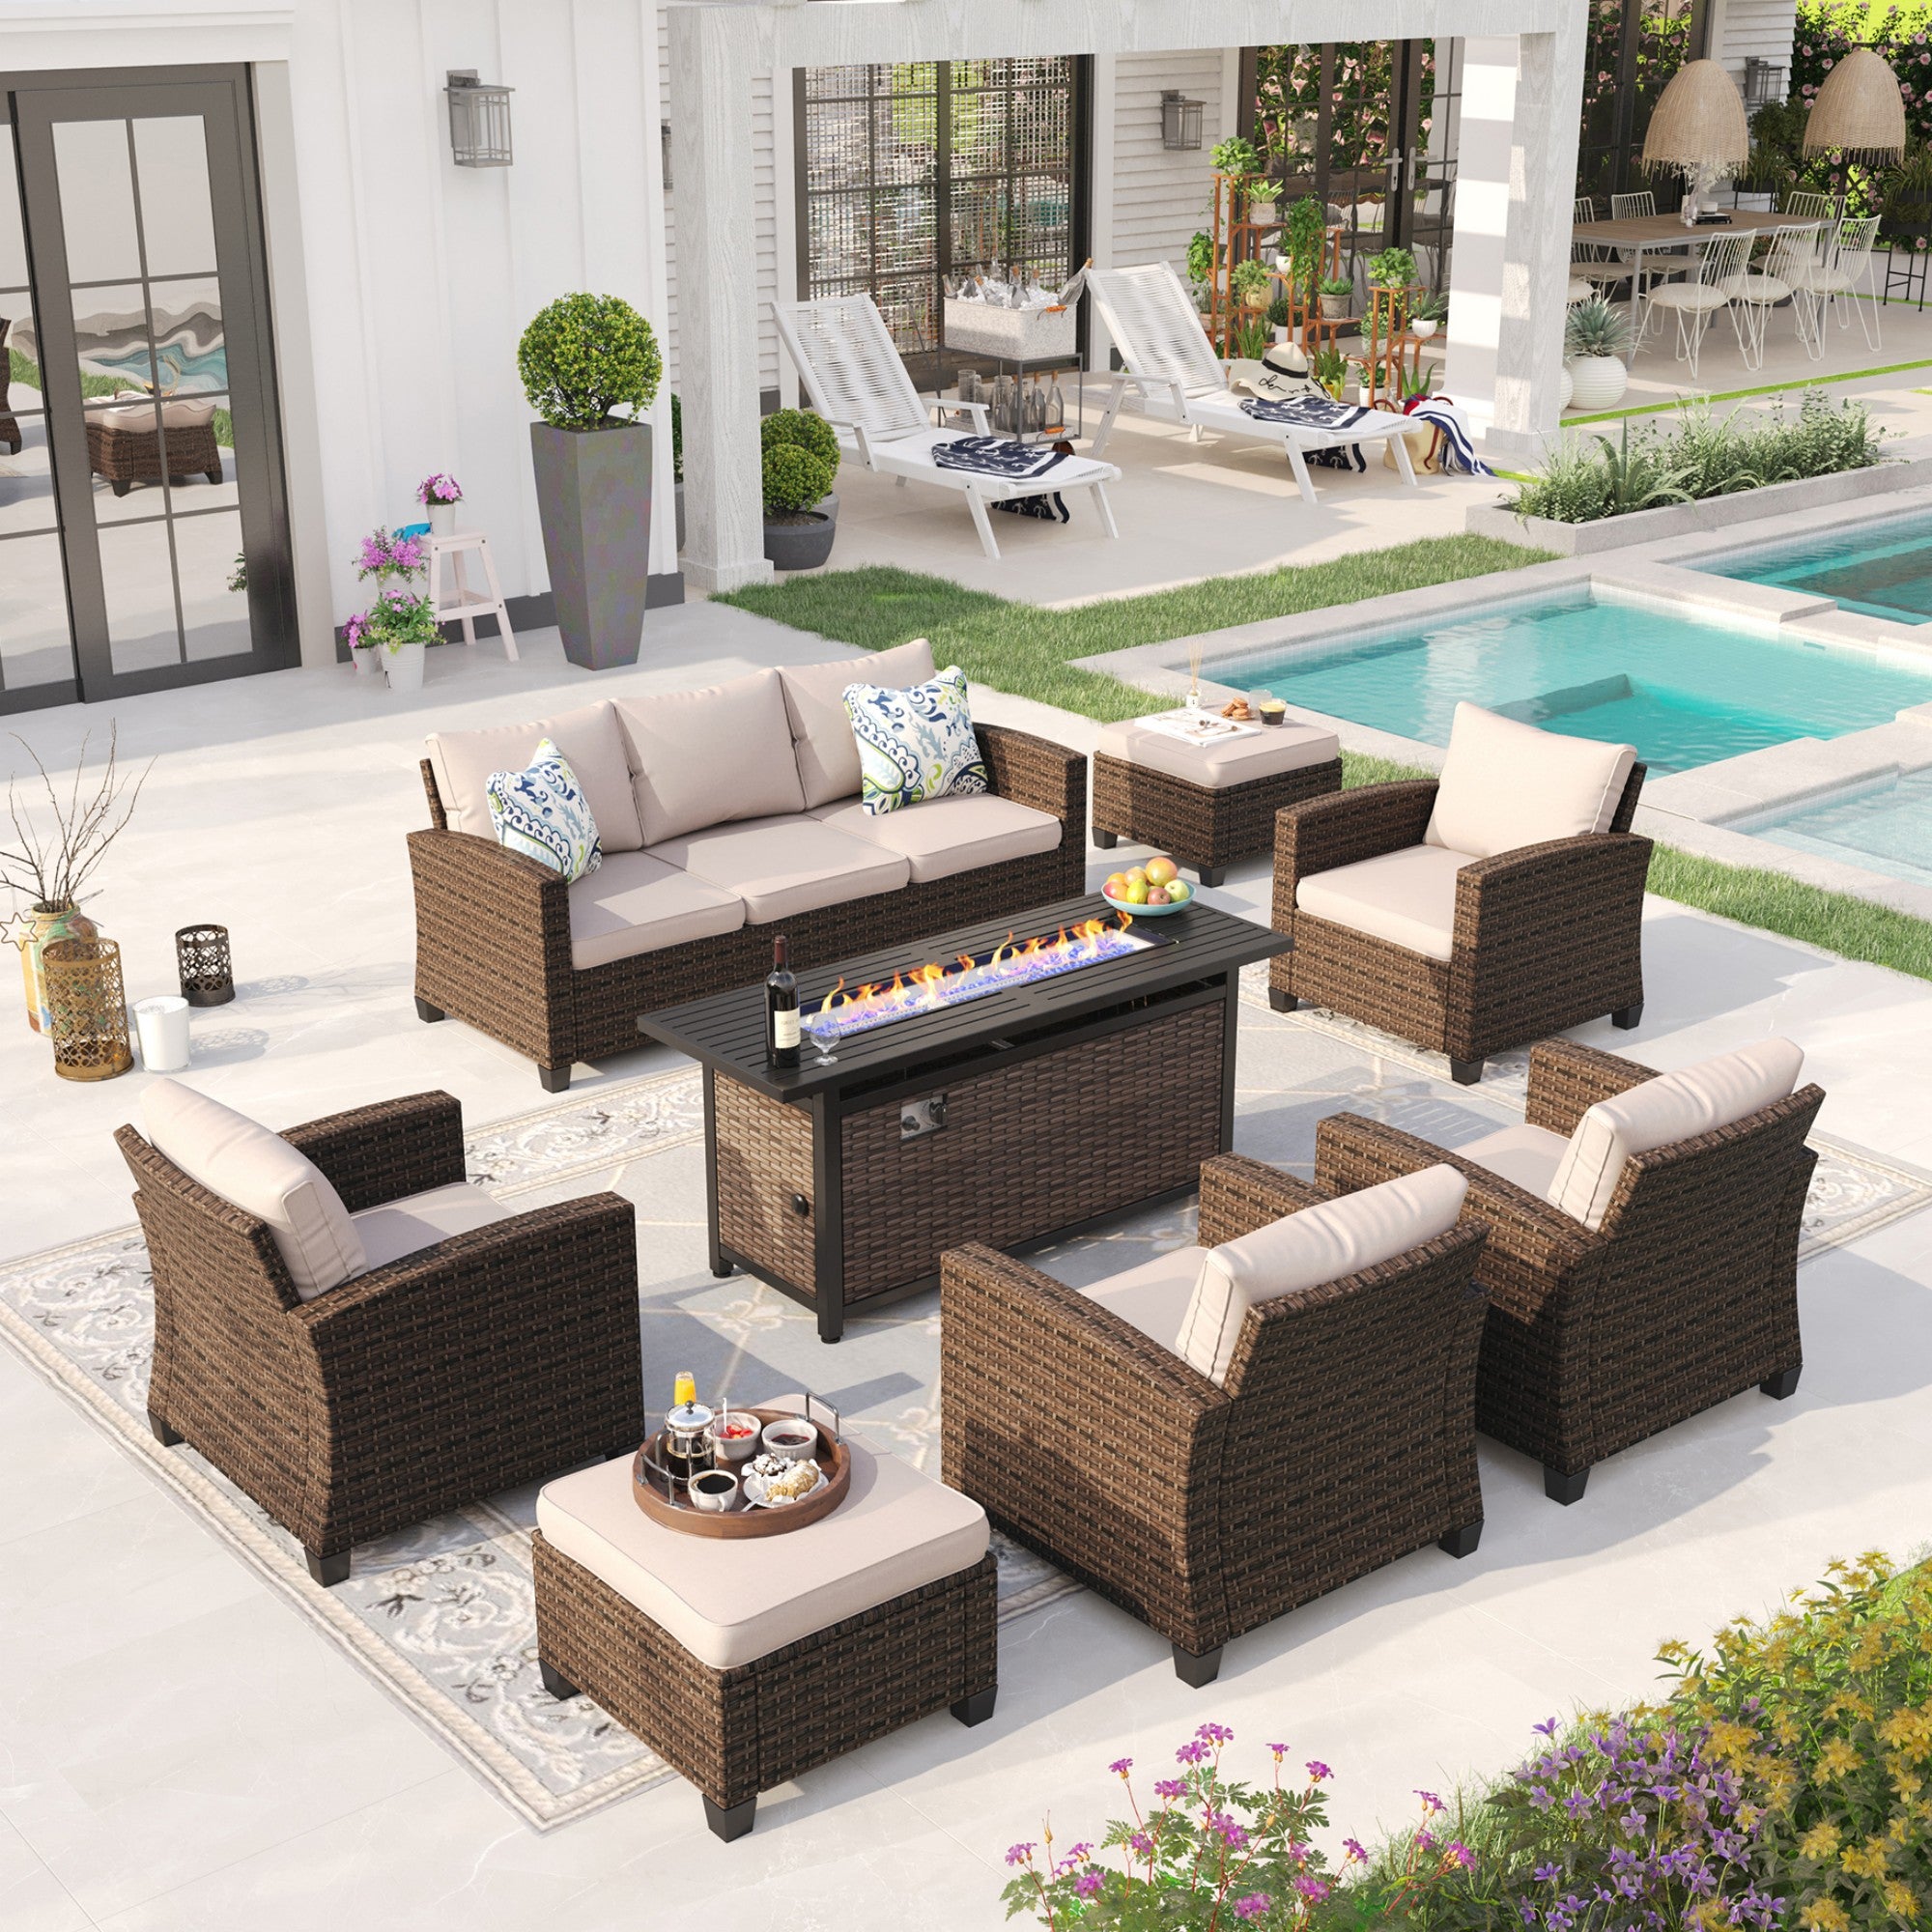 Sophia & William 8 Pieces Wicker Patio Furniture Set 9-Seat Outdoor Conversation Set with 56" Fire Pit Table, Beige - image 1 of 10